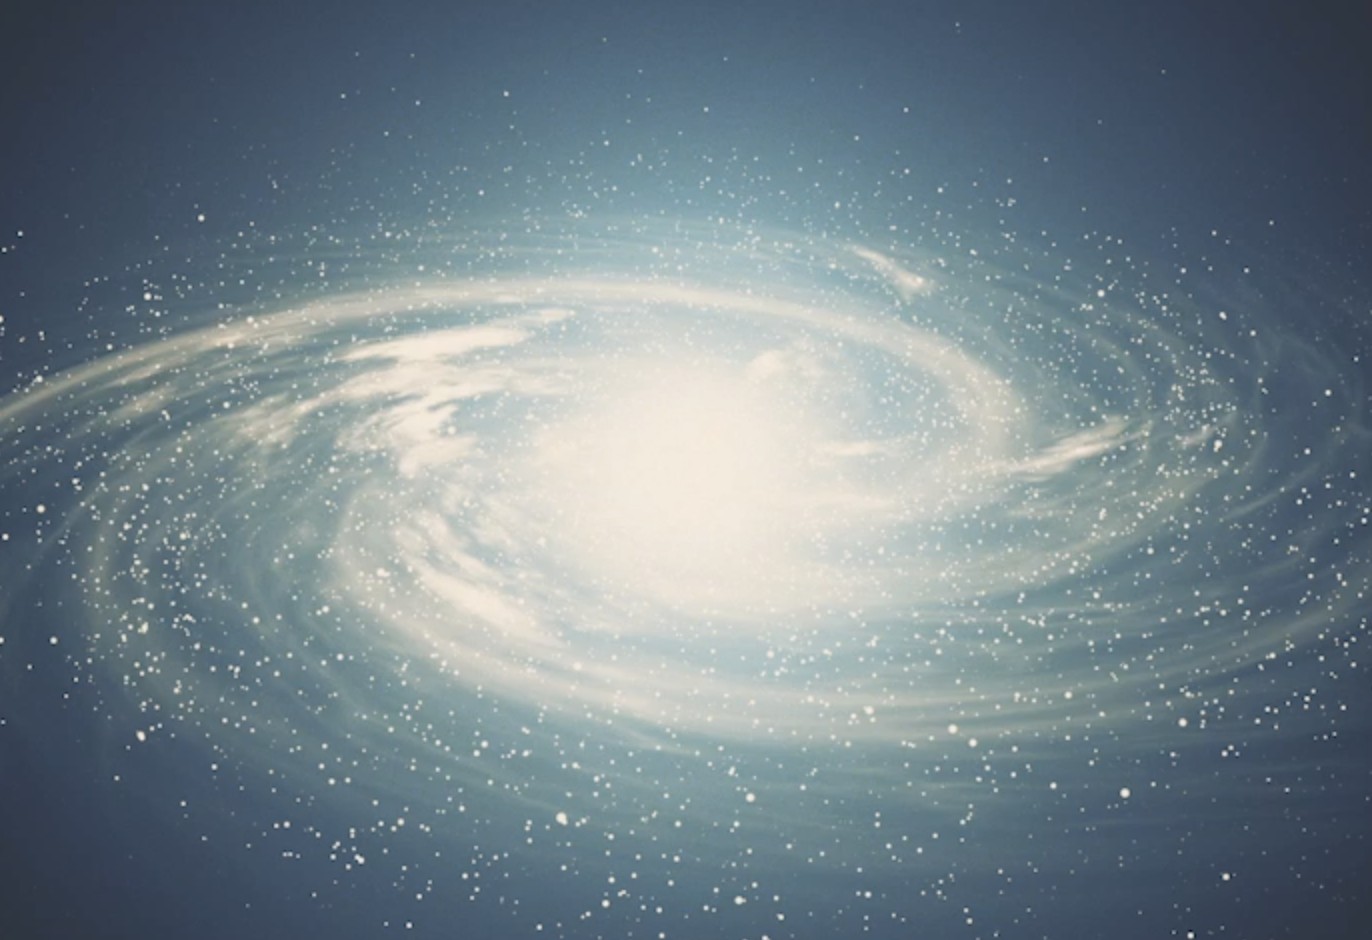 A beautiful space scene with a rotating galaxy 